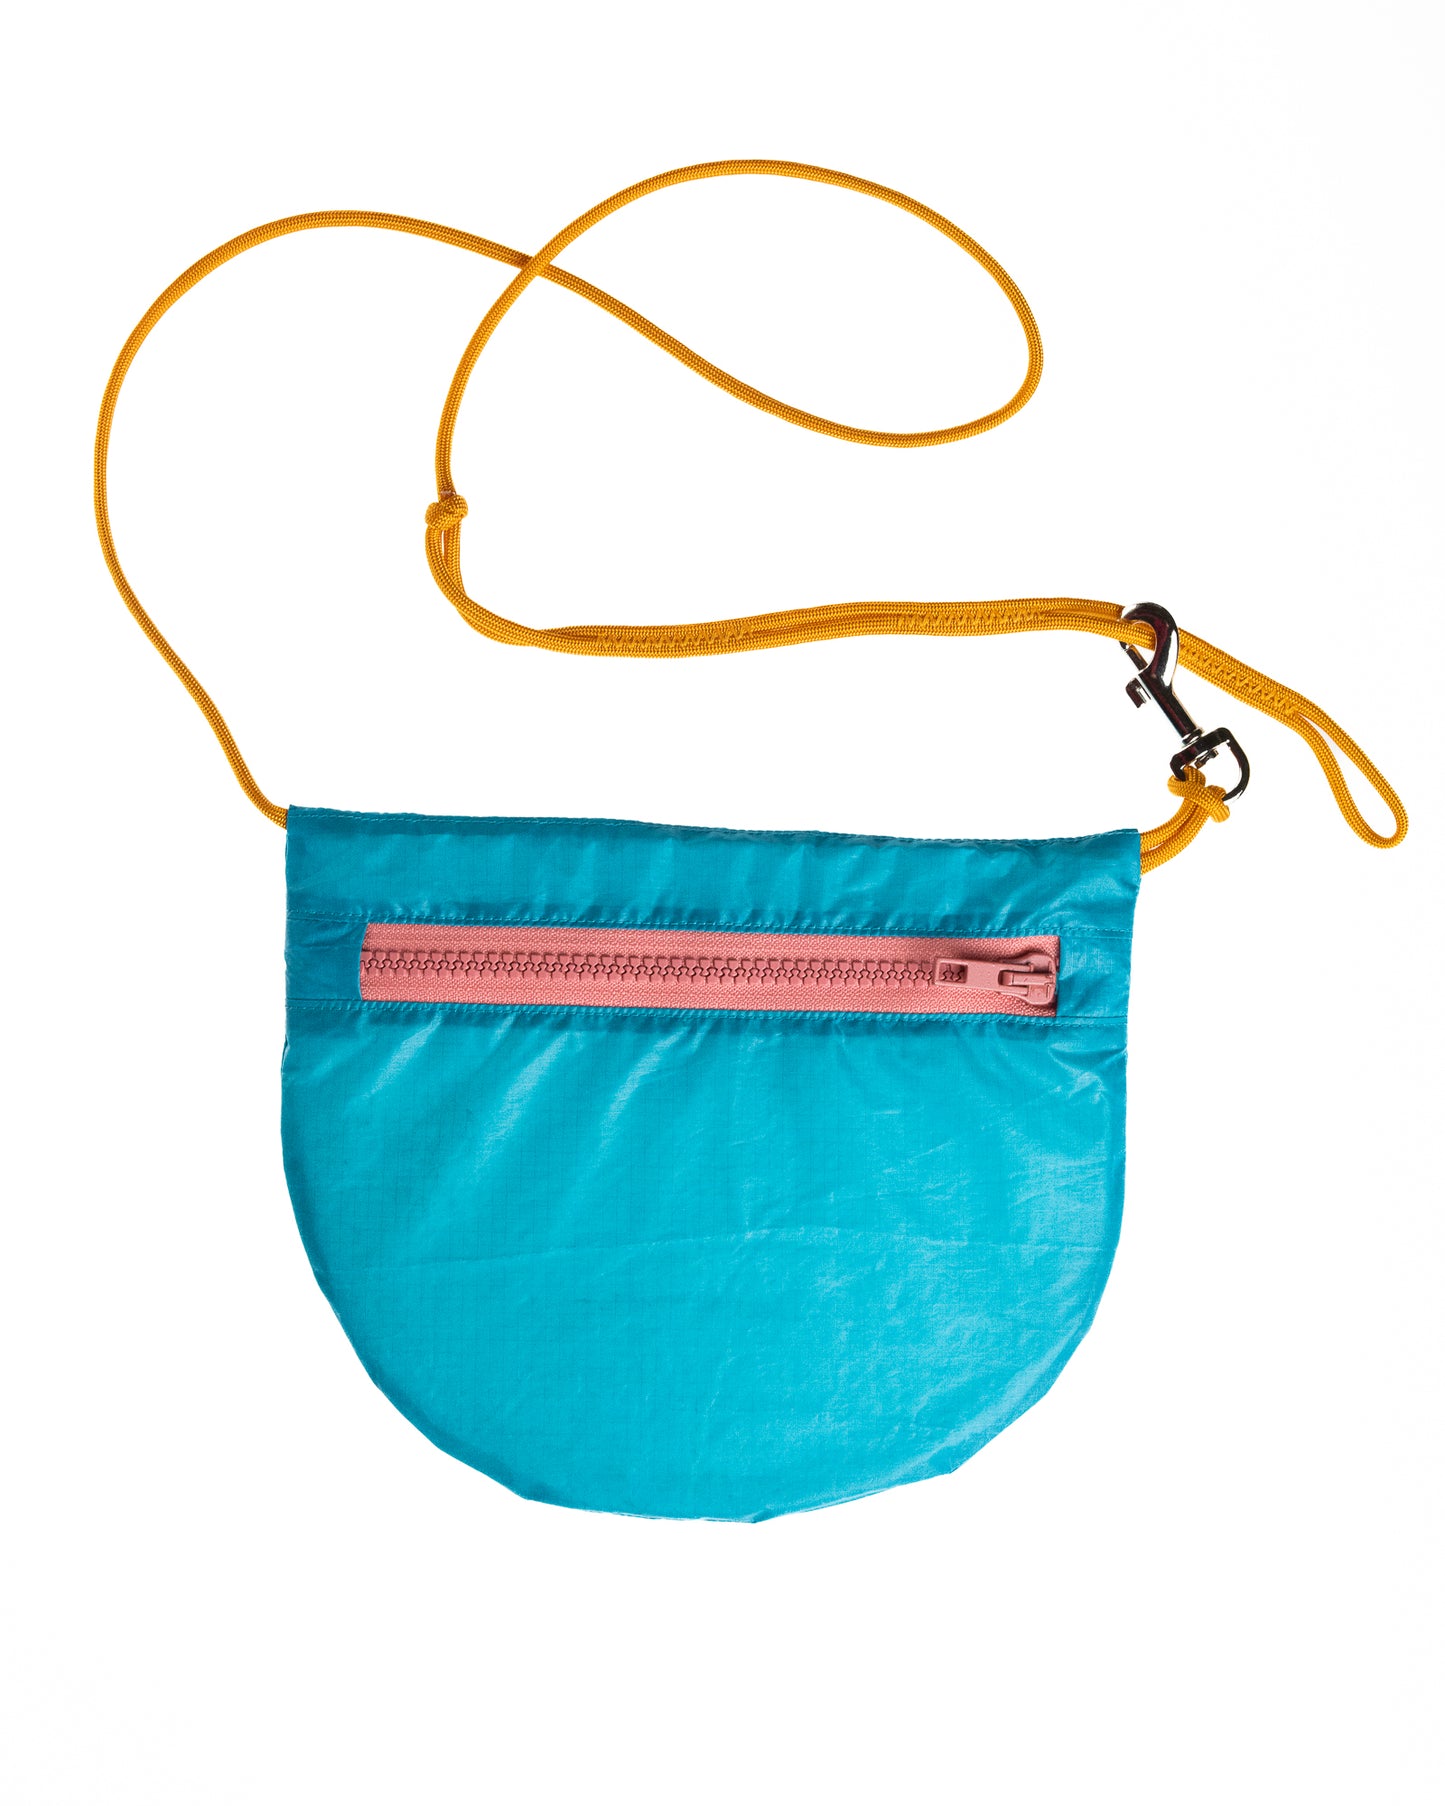 sling bag in turquoise with dusty rose zipper and orange rope strap made from recycled ripstop nylon